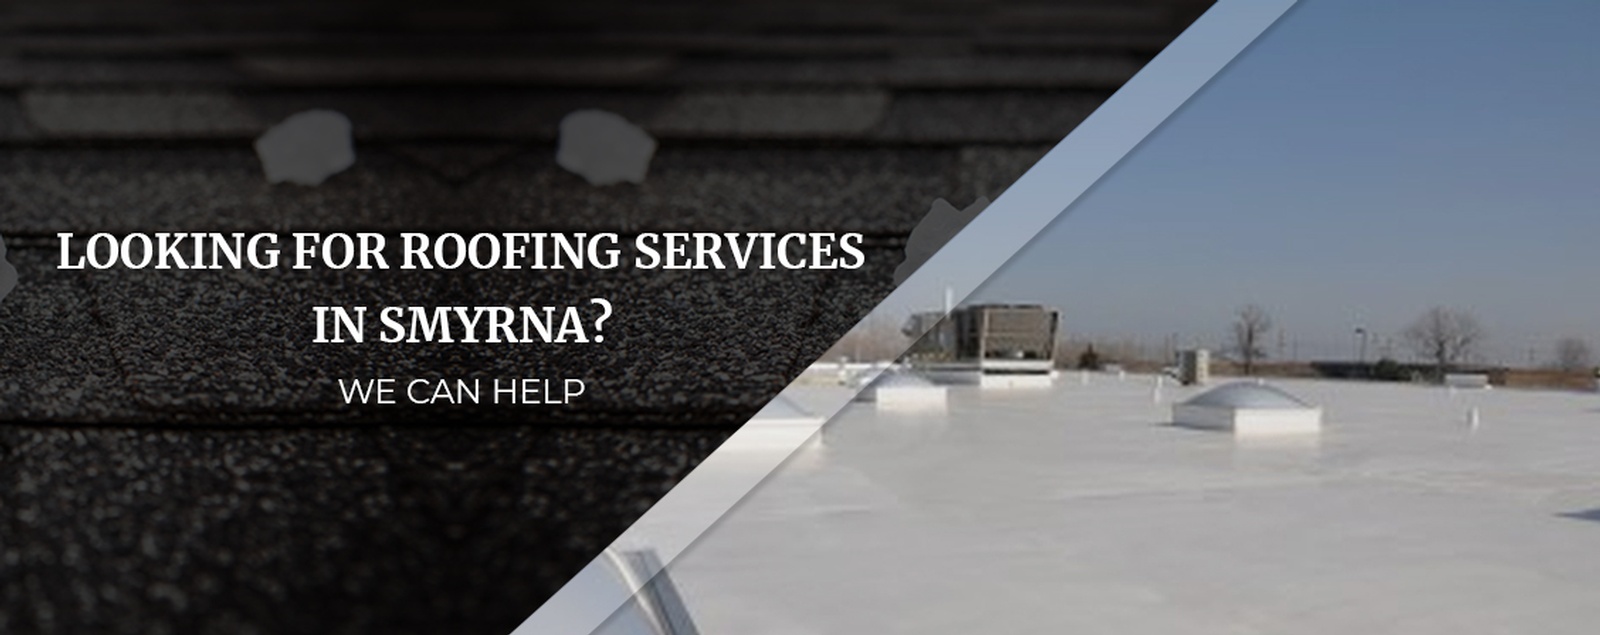 Looking For Roofing Services In Smyrna We Can Help